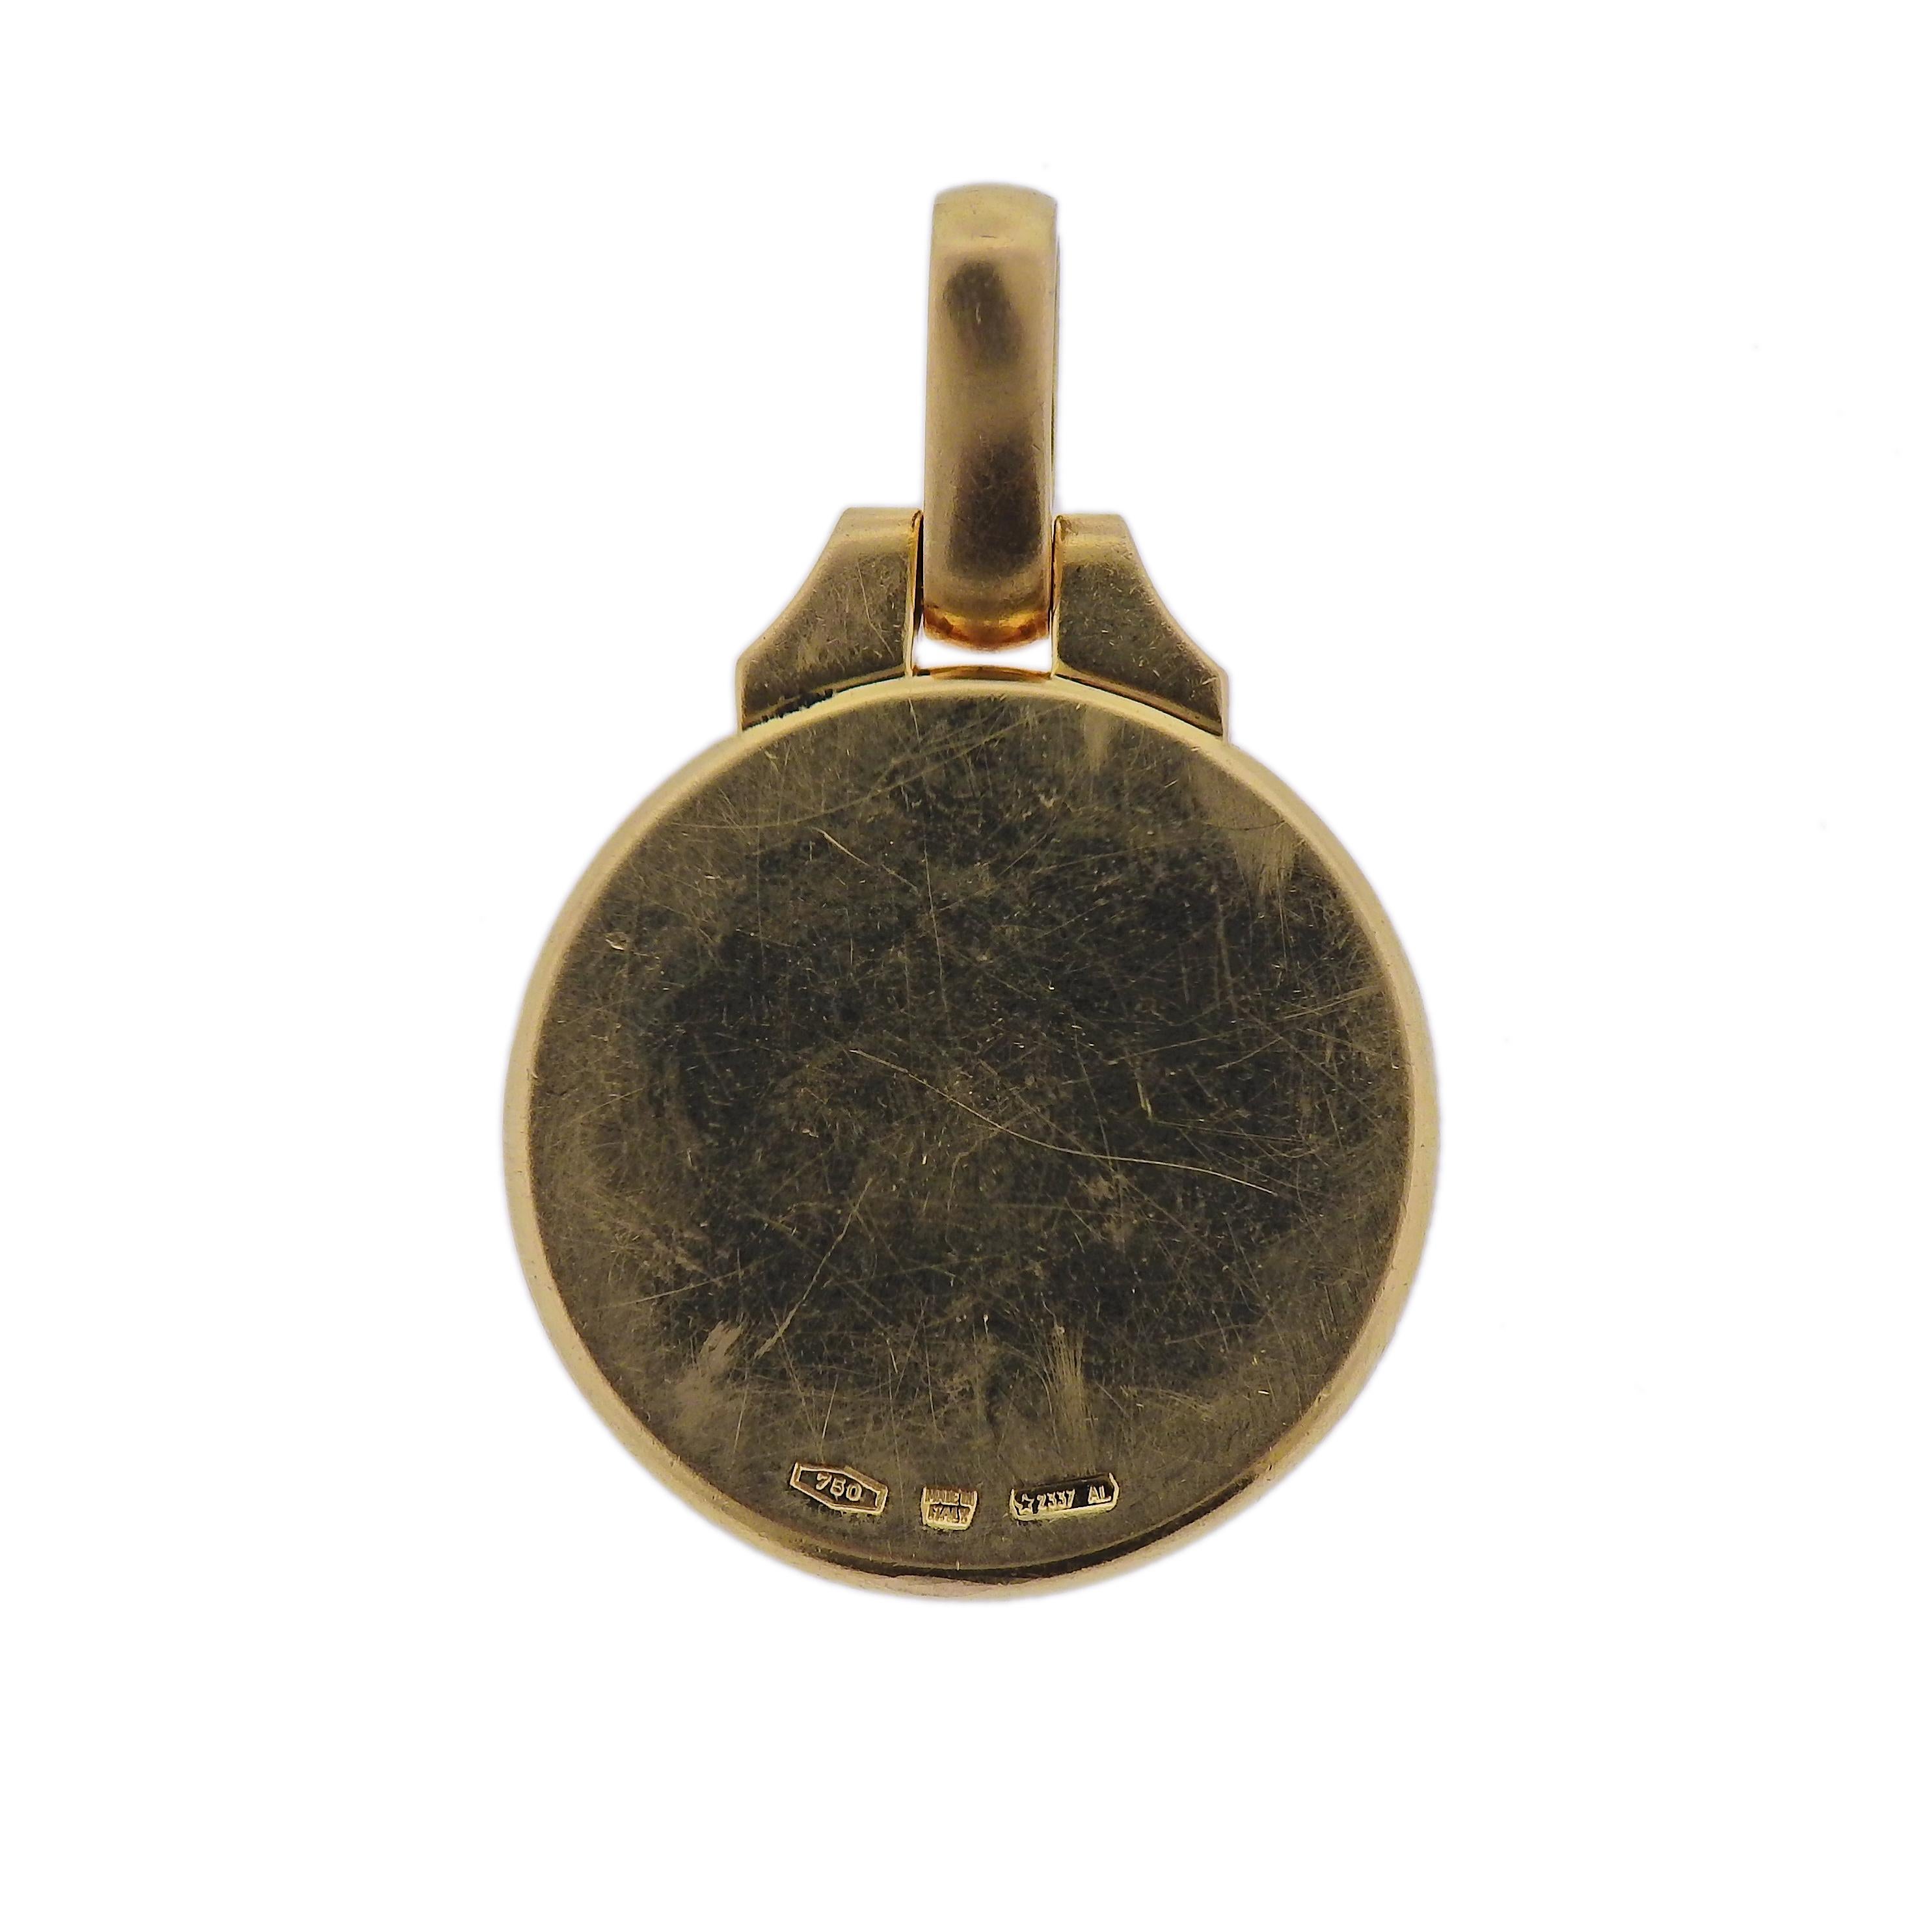 18k gold Bvlgari pendant, depicting cancer Zodiac sign. Pendant is 38mm long with bale x 25mm in diameter. Marked: 750, made in Italy, Bvlgari. Weight - 18.4 grams.